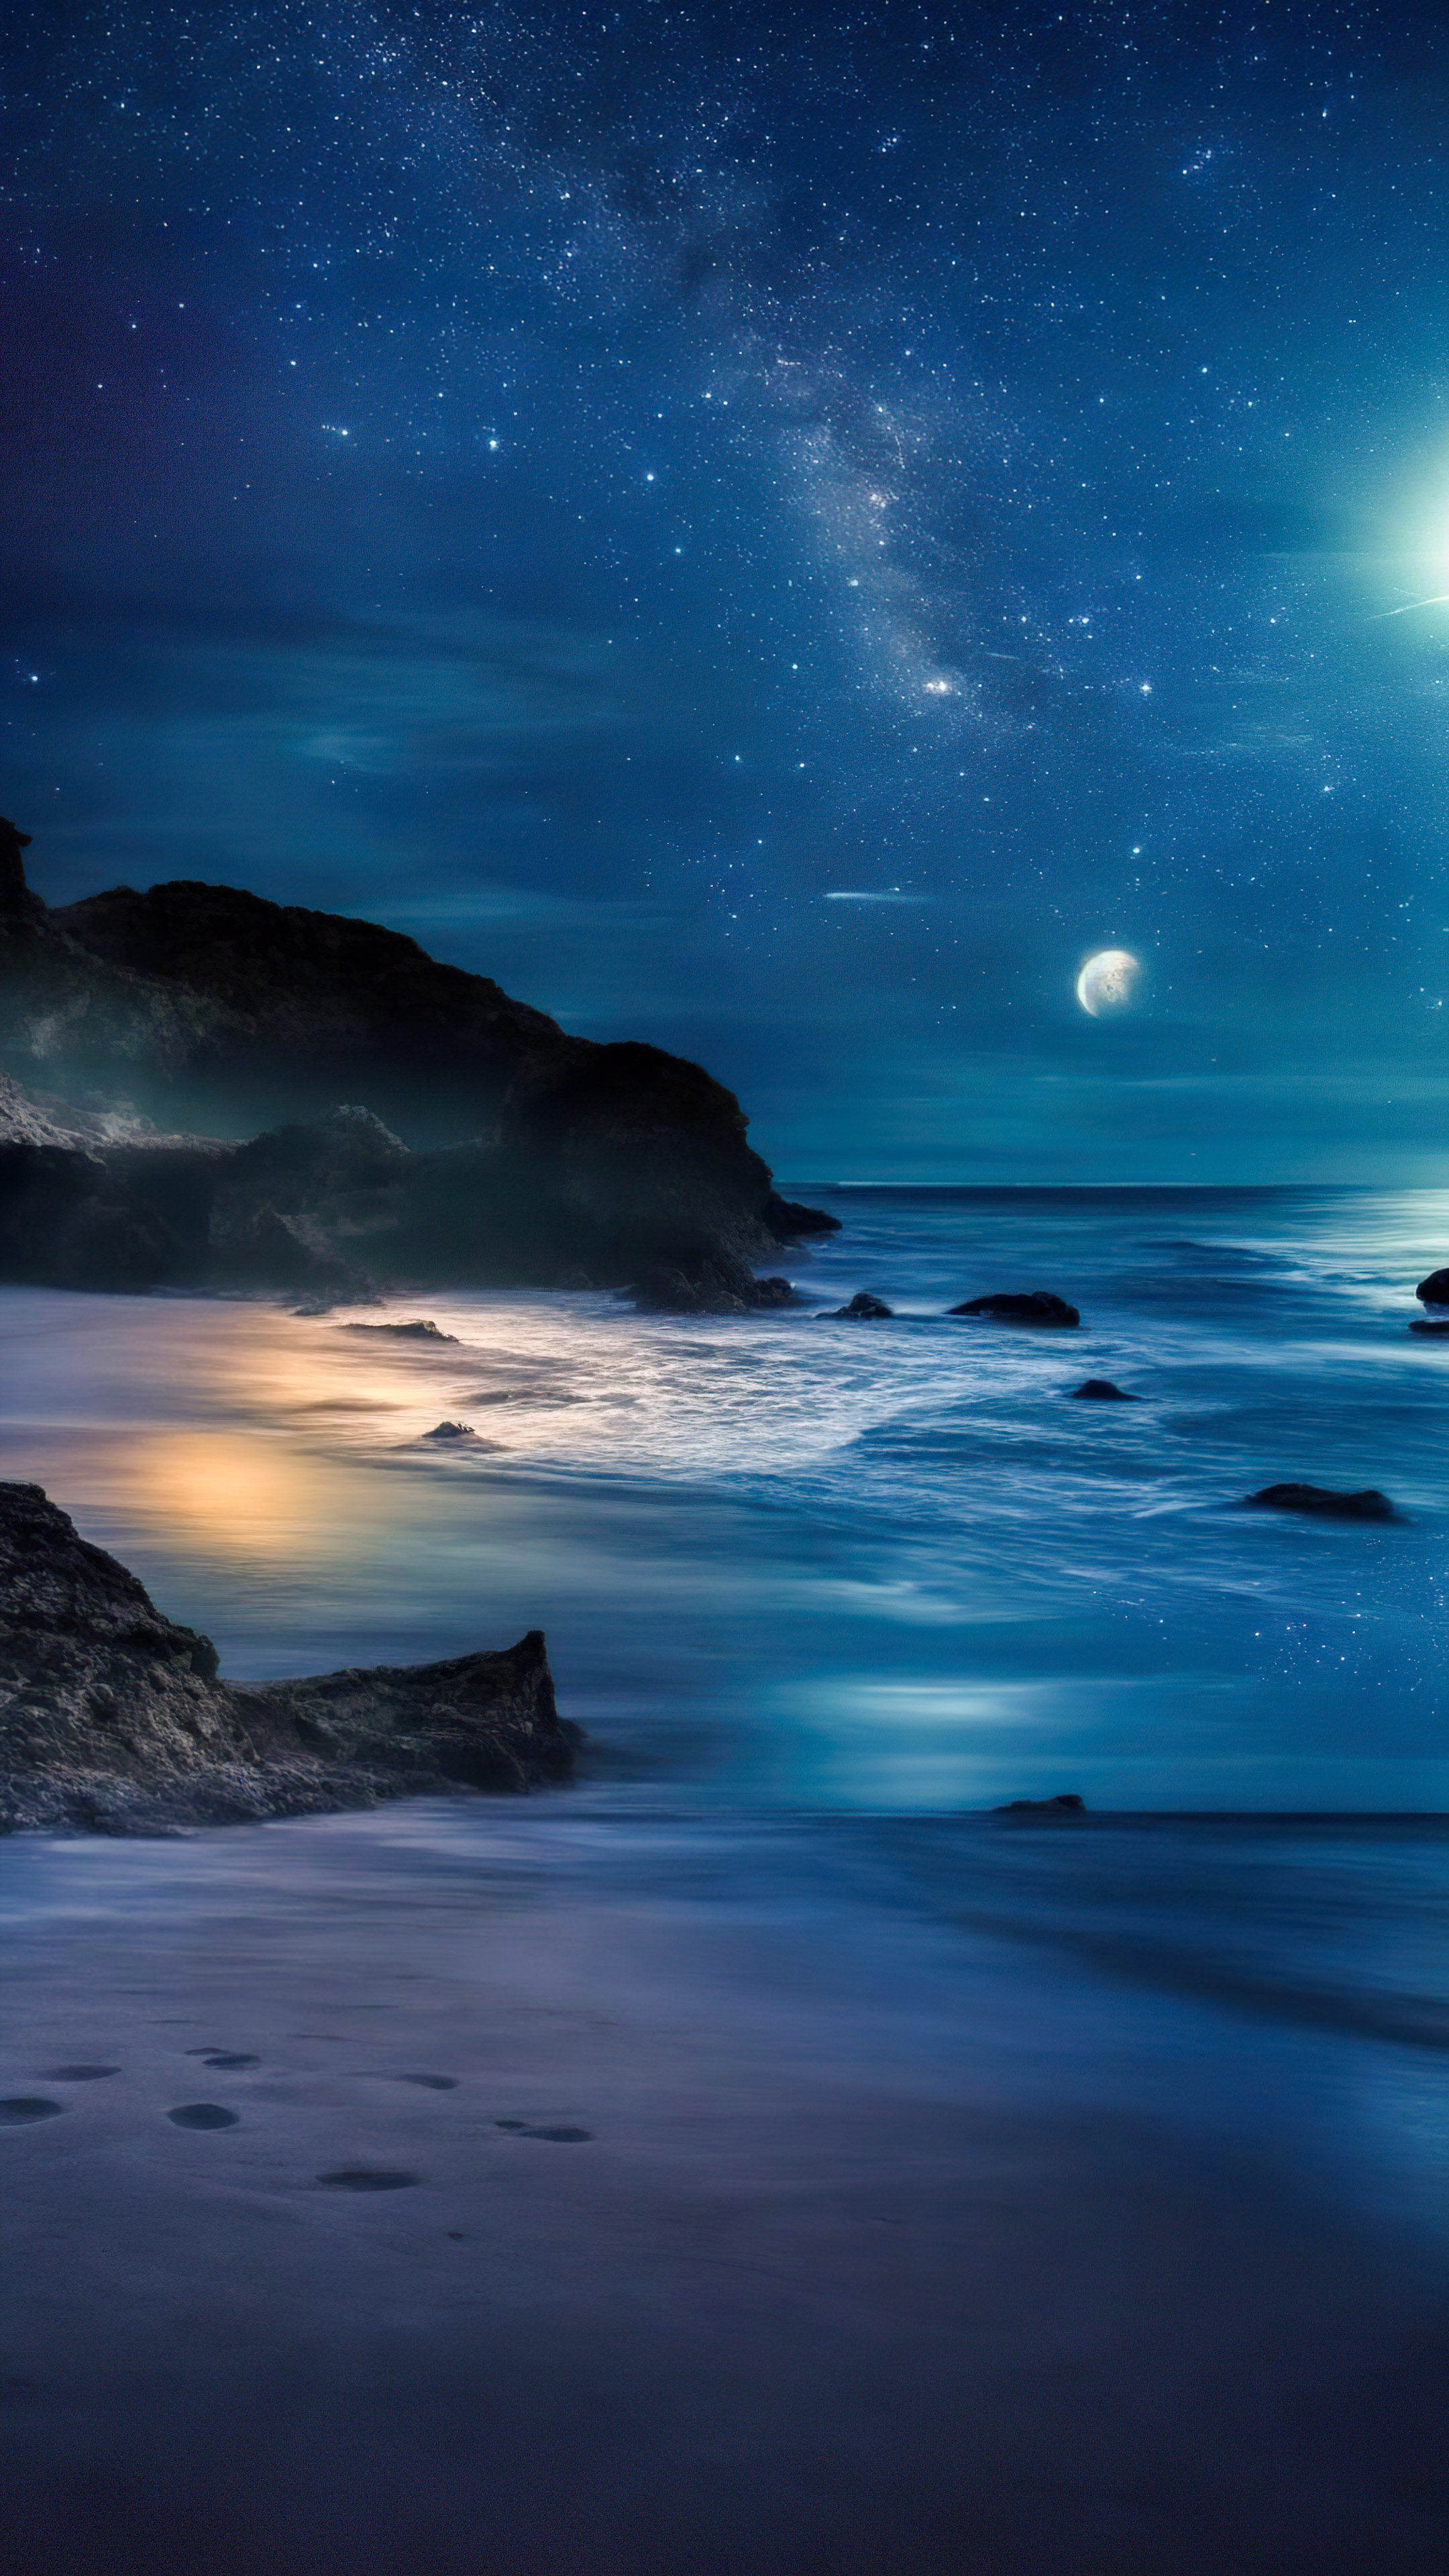 Transform your iPhone with our beautiful nature wallpaper free download, depicting a remote beach at night, where the waves meet the shoreline under a canvas of twinkling stars.